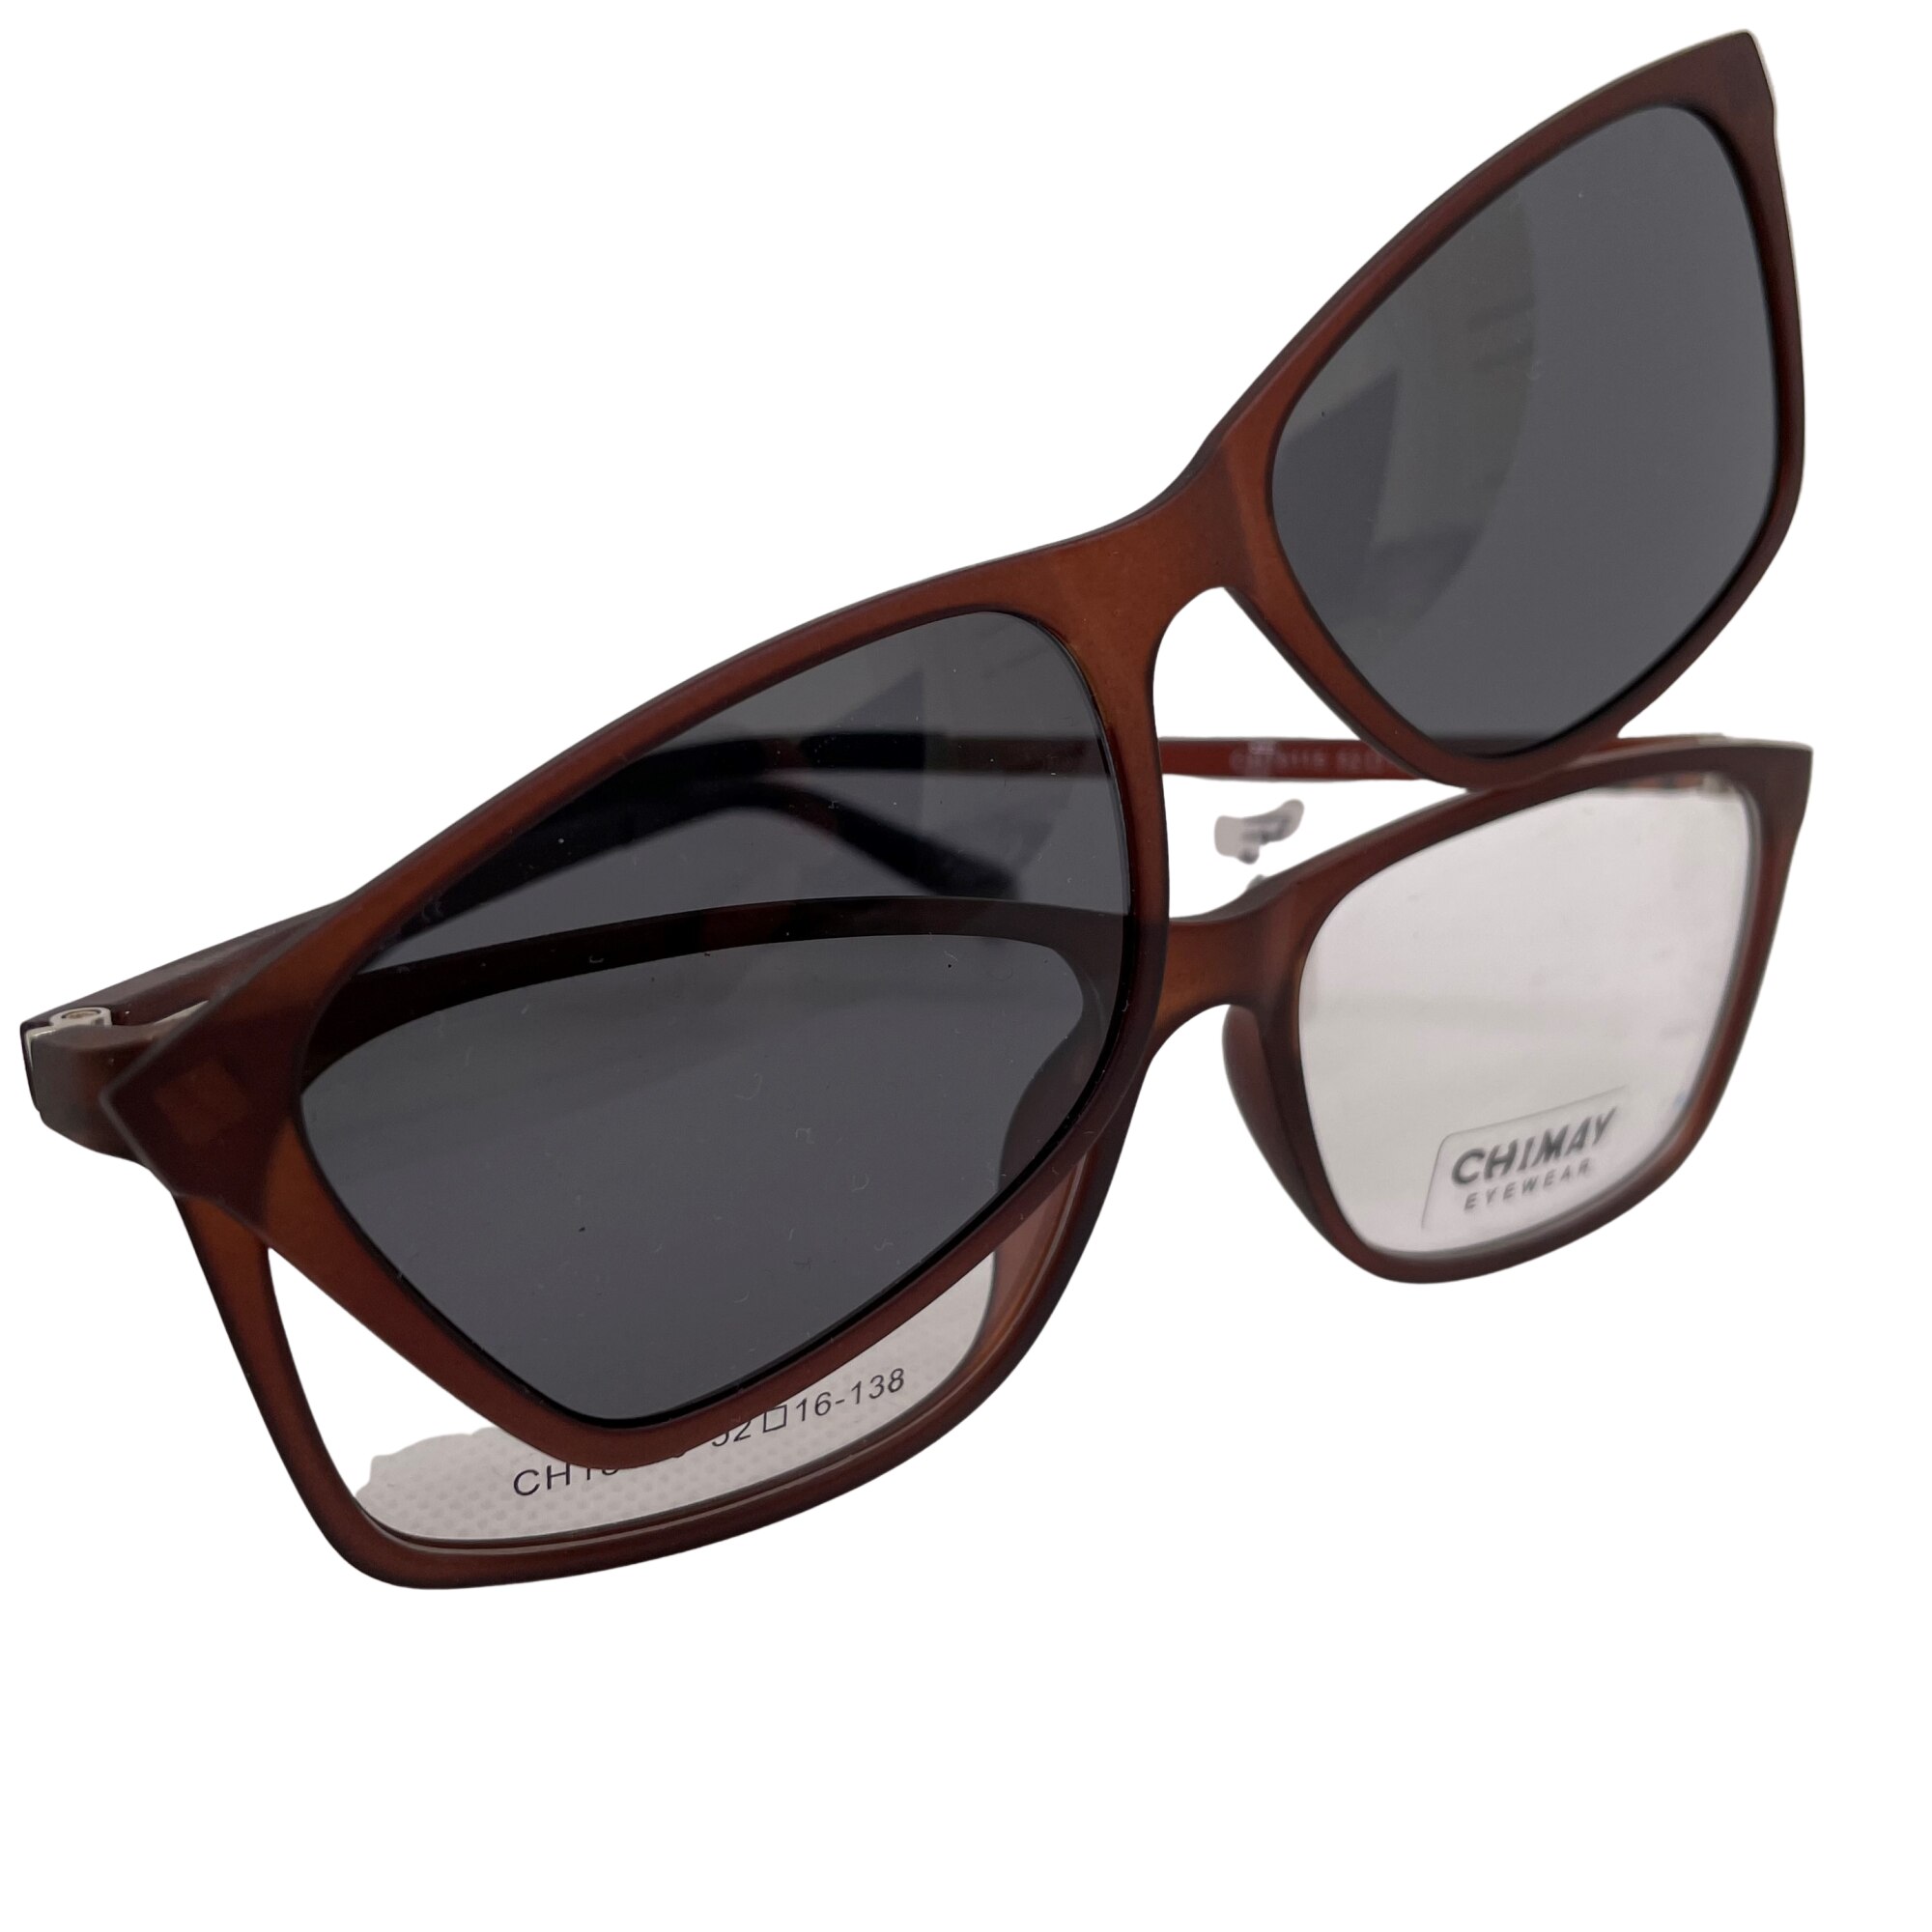 Discovery Change to see Ochelari de vedere cu 1 clip-on magnetic, maro, dioptrie +0,00 - eMAG.ro